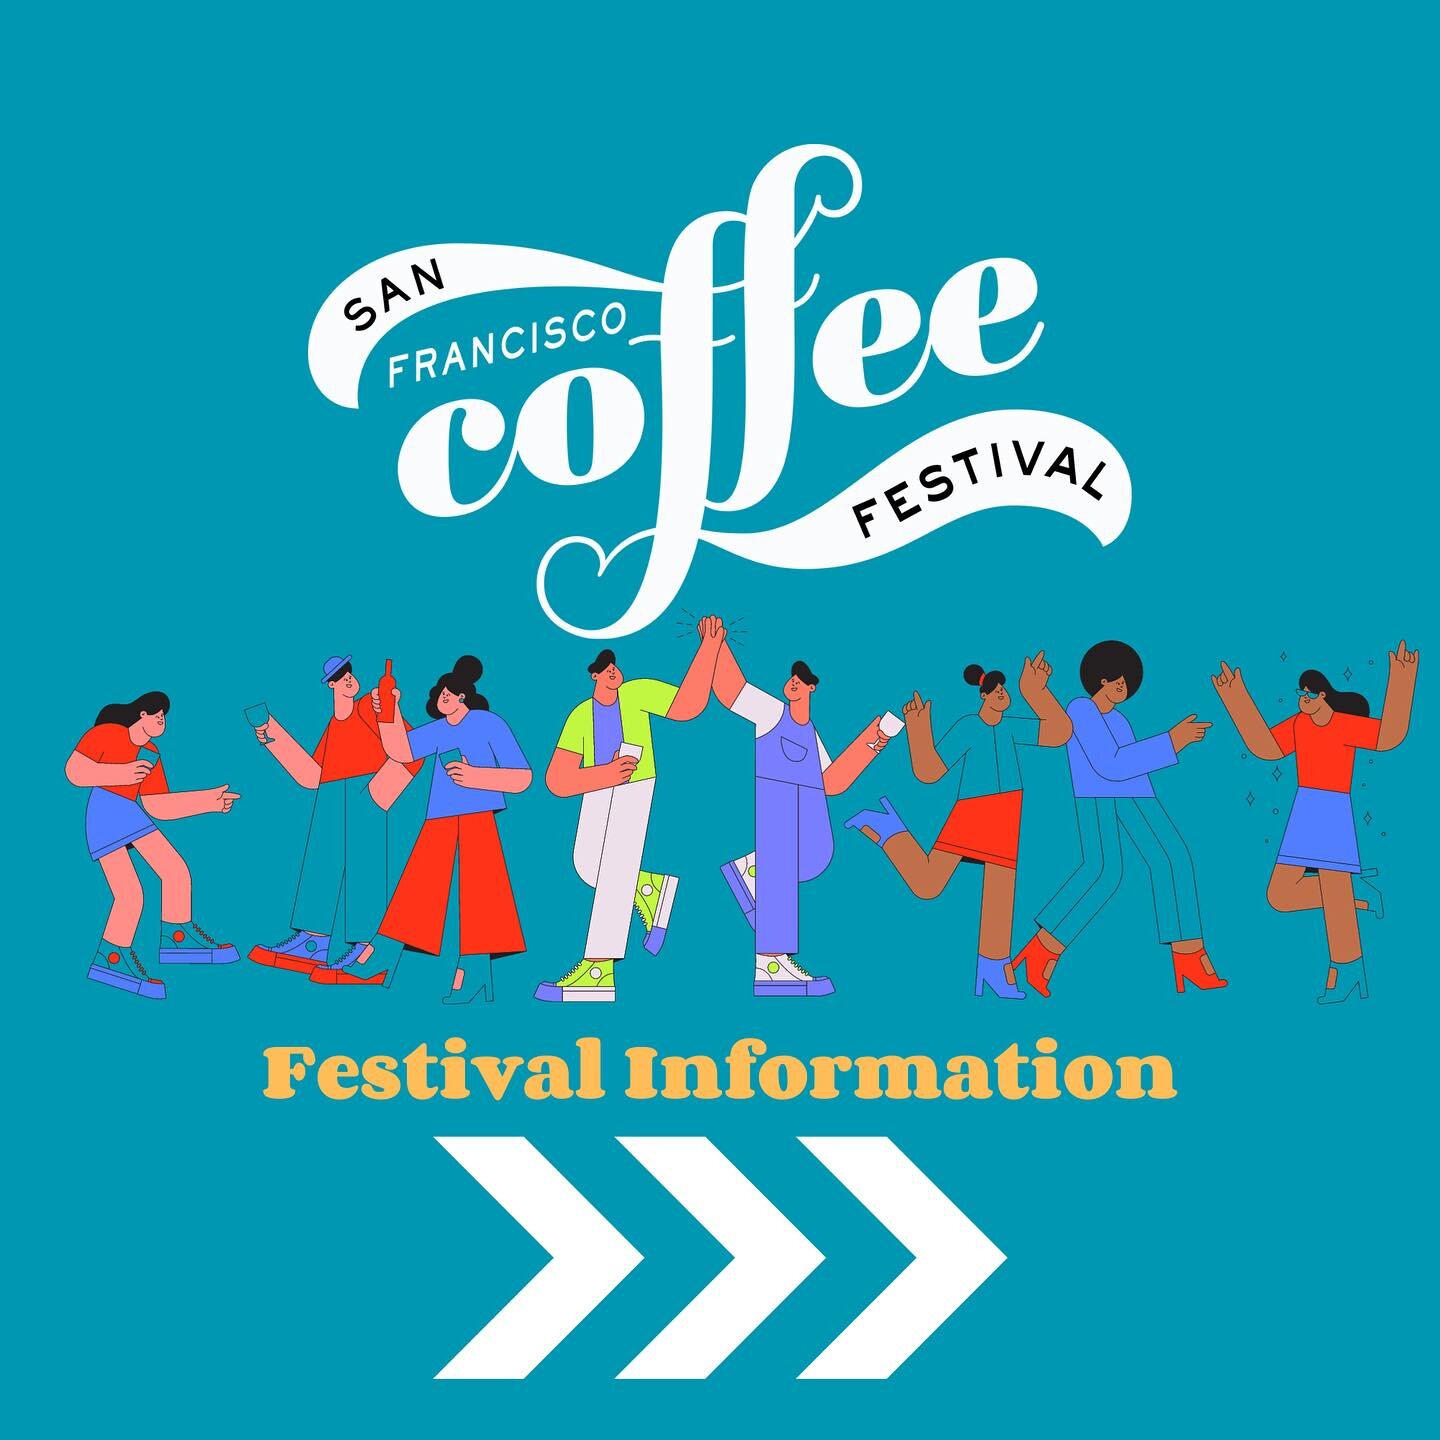 This weekend! Swipe through for up to date information on SF Coffee Festival entrance policies and more.